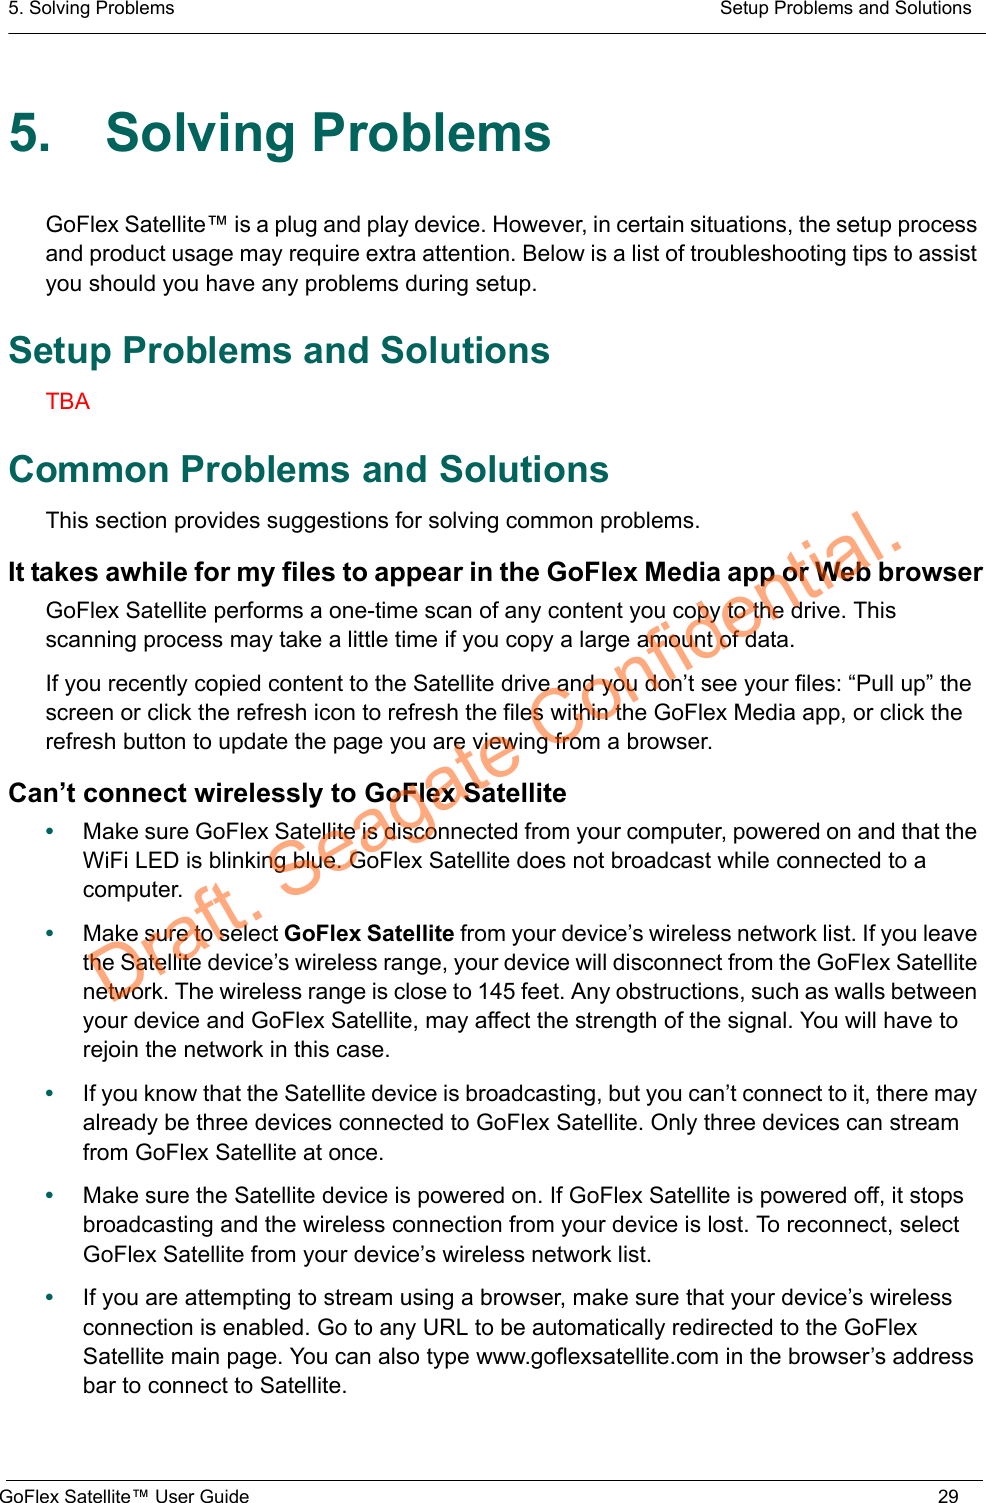 5. Solving Problems  Setup Problems and SolutionsGoFlex Satellite™ User Guide 295. Solving ProblemsGoFlex Satellite™ is a plug and play device. However, in certain situations, the setup process and product usage may require extra attention. Below is a list of troubleshooting tips to assist you should you have any problems during setup.Setup Problems and SolutionsTBACommon Problems and SolutionsThis section provides suggestions for solving common problems.It takes awhile for my files to appear in the GoFlex Media app or Web browserGoFlex Satellite performs a one-time scan of any content you copy to the drive. This scanning process may take a little time if you copy a large amount of data.If you recently copied content to the Satellite drive and you don’t see your files: “Pull up” the screen or click the refresh icon to refresh the files within the GoFlex Media app, or click the refresh button to update the page you are viewing from a browser.Can’t connect wirelessly to GoFlex Satellite•Make sure GoFlex Satellite is disconnected from your computer, powered on and that the WiFi LED is blinking blue. GoFlex Satellite does not broadcast while connected to a computer.•Make sure to select GoFlex Satellite from your device’s wireless network list. If you leave the Satellite device’s wireless range, your device will disconnect from the GoFlex Satellite network. The wireless range is close to 145 feet. Any obstructions, such as walls between your device and GoFlex Satellite, may affect the strength of the signal. You will have to rejoin the network in this case.•If you know that the Satellite device is broadcasting, but you can’t connect to it, there may already be three devices connected to GoFlex Satellite. Only three devices can stream from GoFlex Satellite at once.•Make sure the Satellite device is powered on. If GoFlex Satellite is powered off, it stops broadcasting and the wireless connection from your device is lost. To reconnect, select GoFlex Satellite from your device’s wireless network list.•If you are attempting to stream using a browser, make sure that your device’s wireless connection is enabled. Go to any URL to be automatically redirected to the GoFlex Satellite main page. You can also type www.goflexsatellite.com in the browser’s address bar to connect to Satellite.Draft. Seagate Confidential.